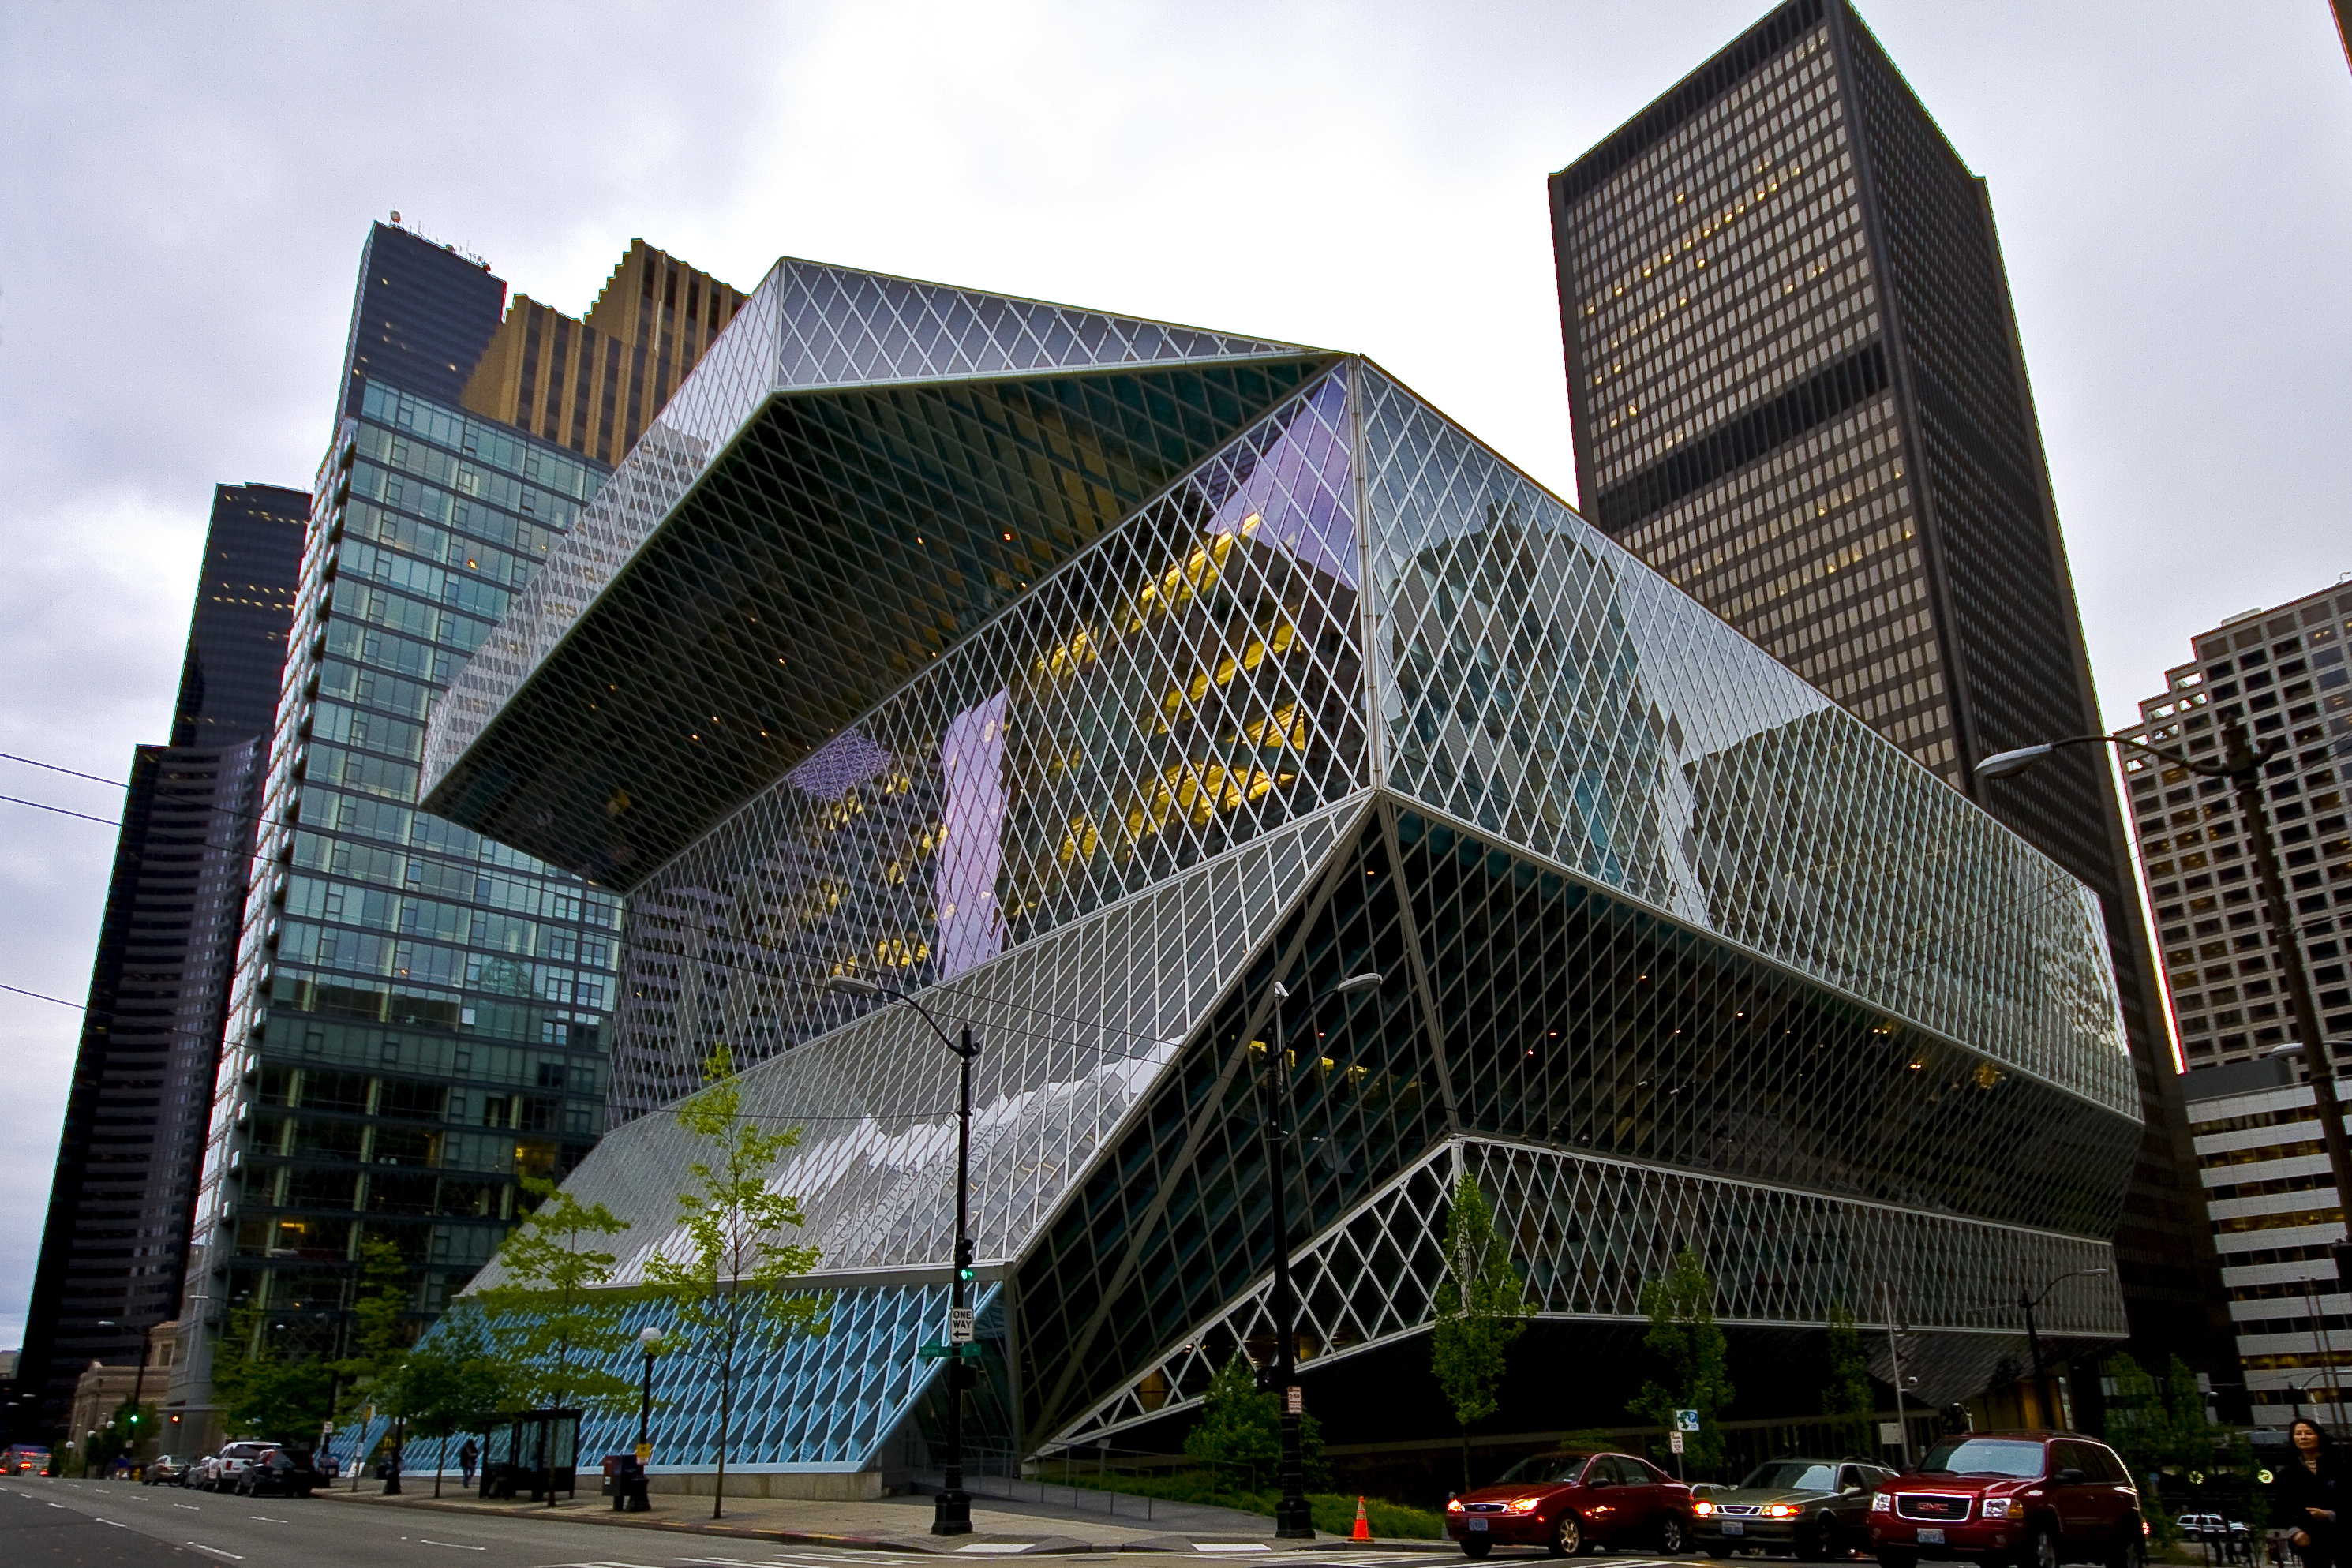 Image of exterior of seattle public library